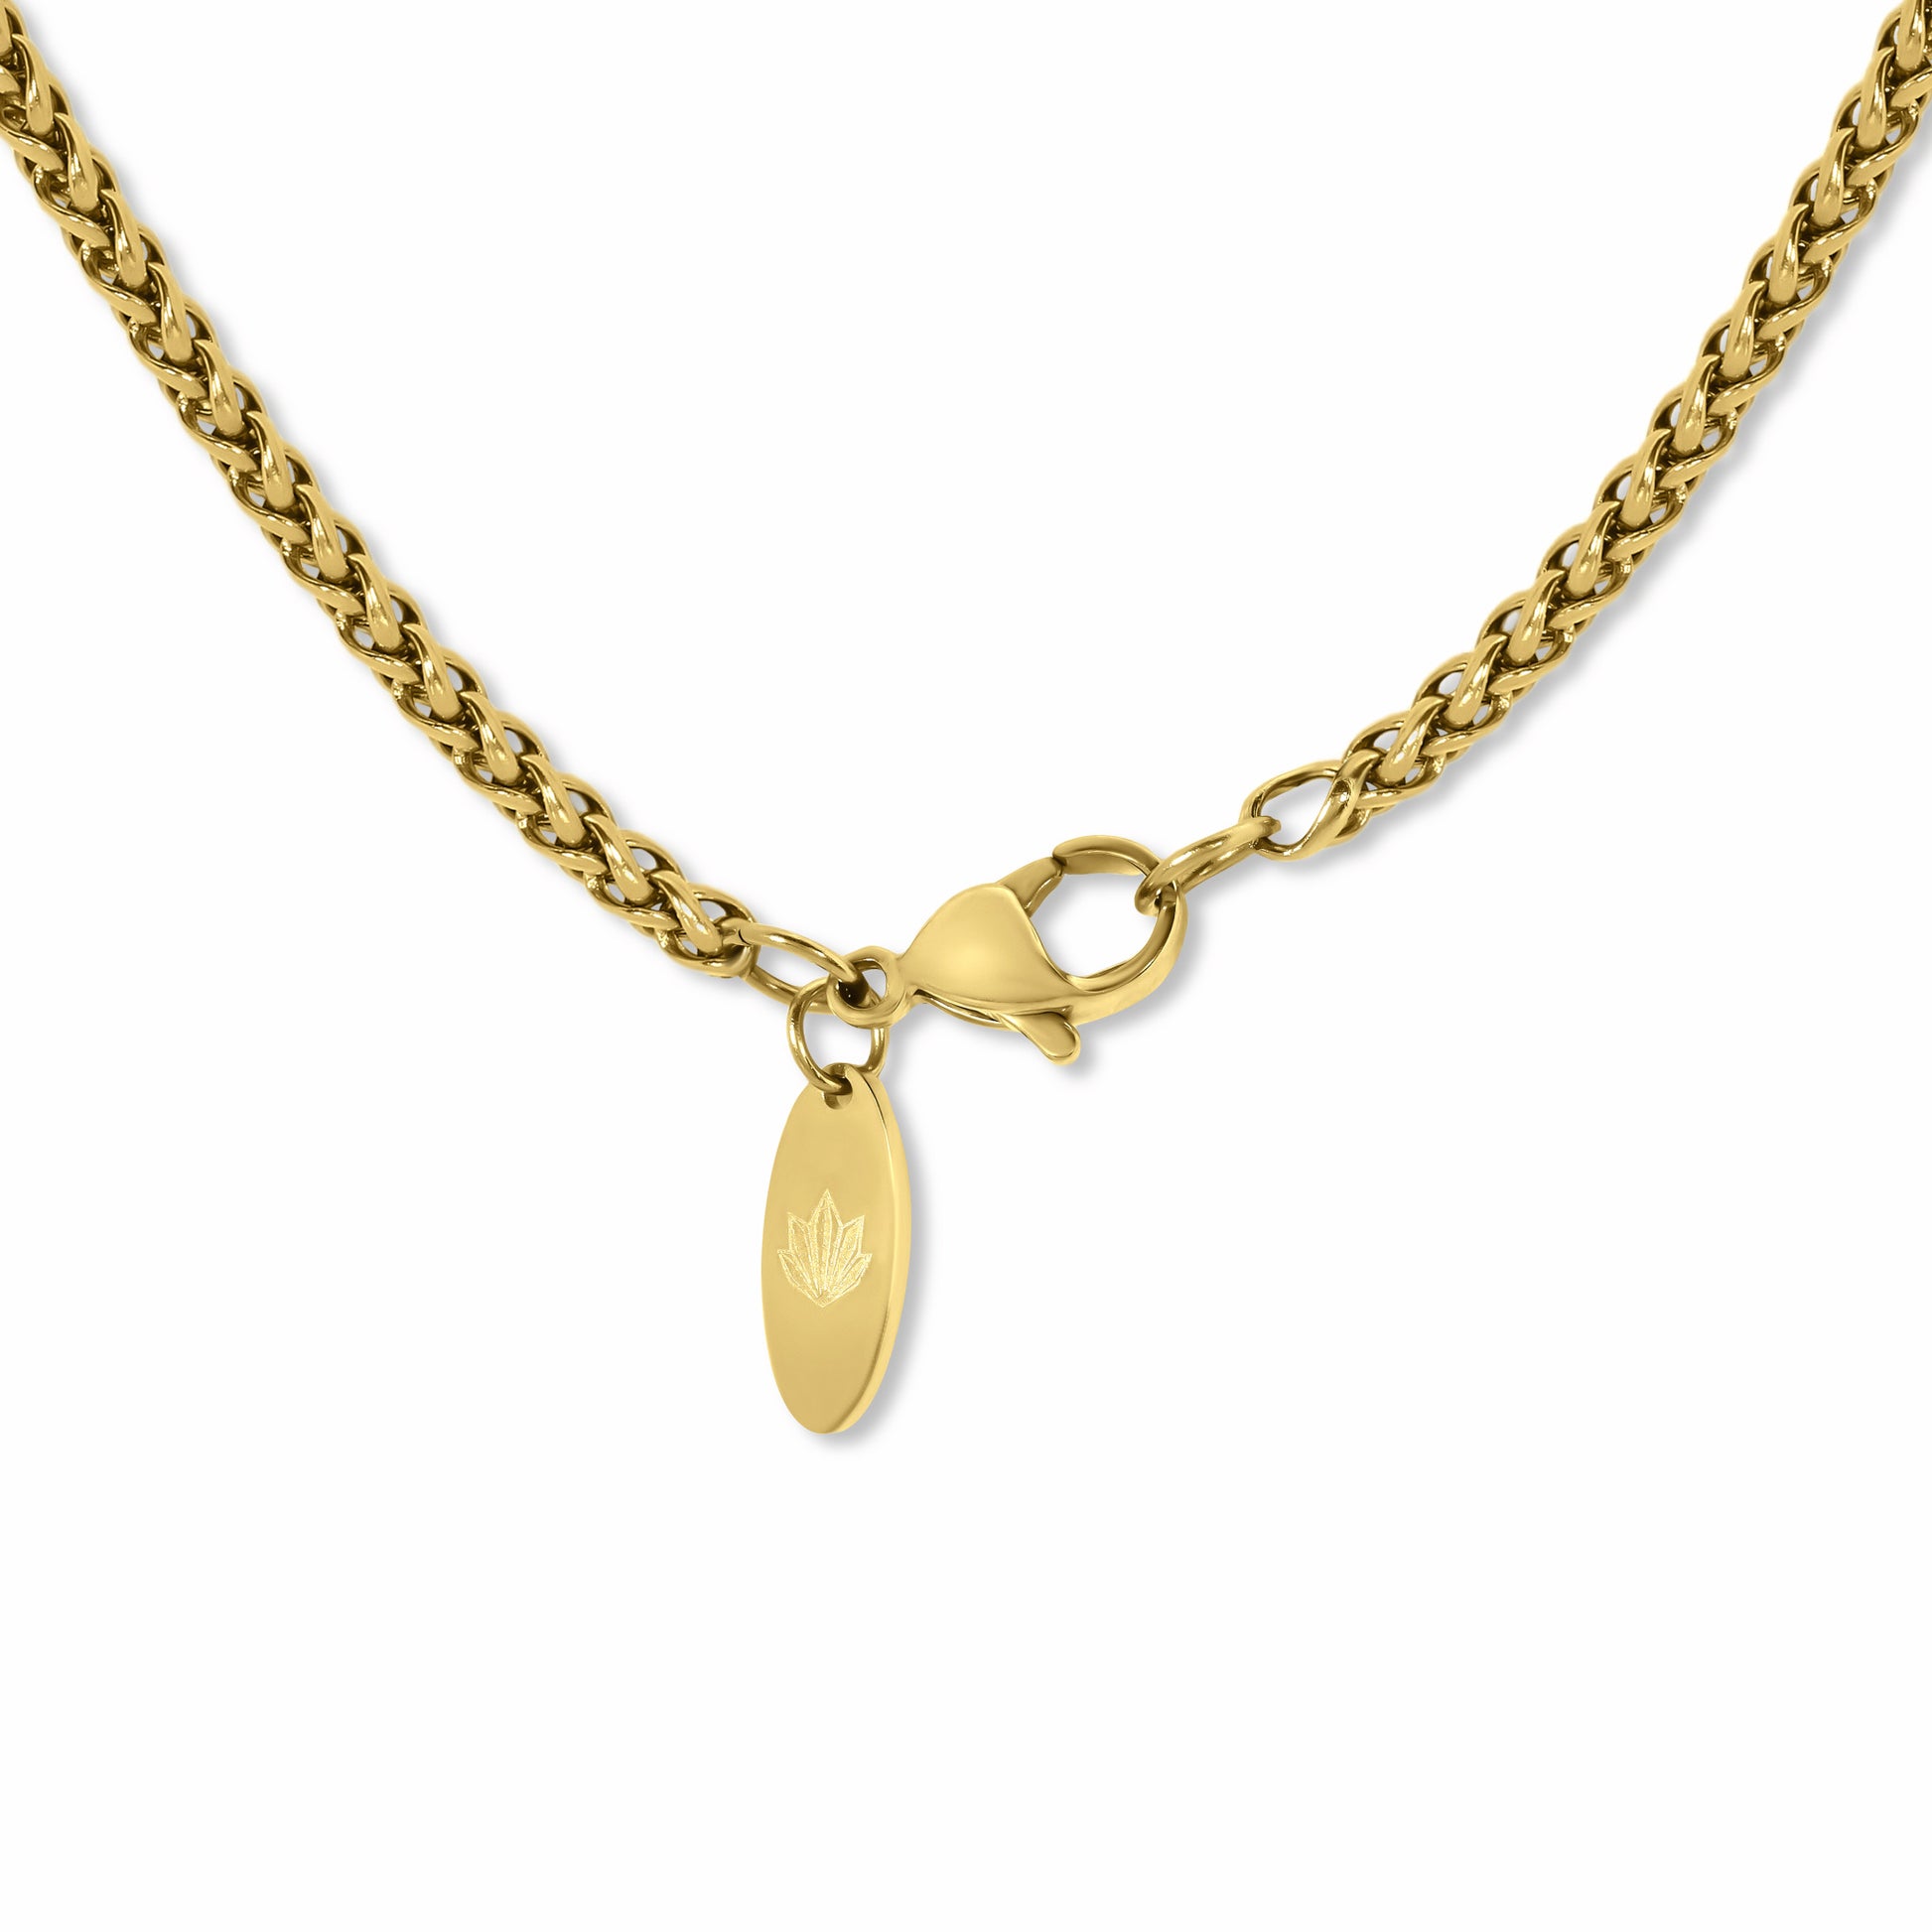 Spiga Chain Gold 3mm clasp with engraved logo tag on a white background